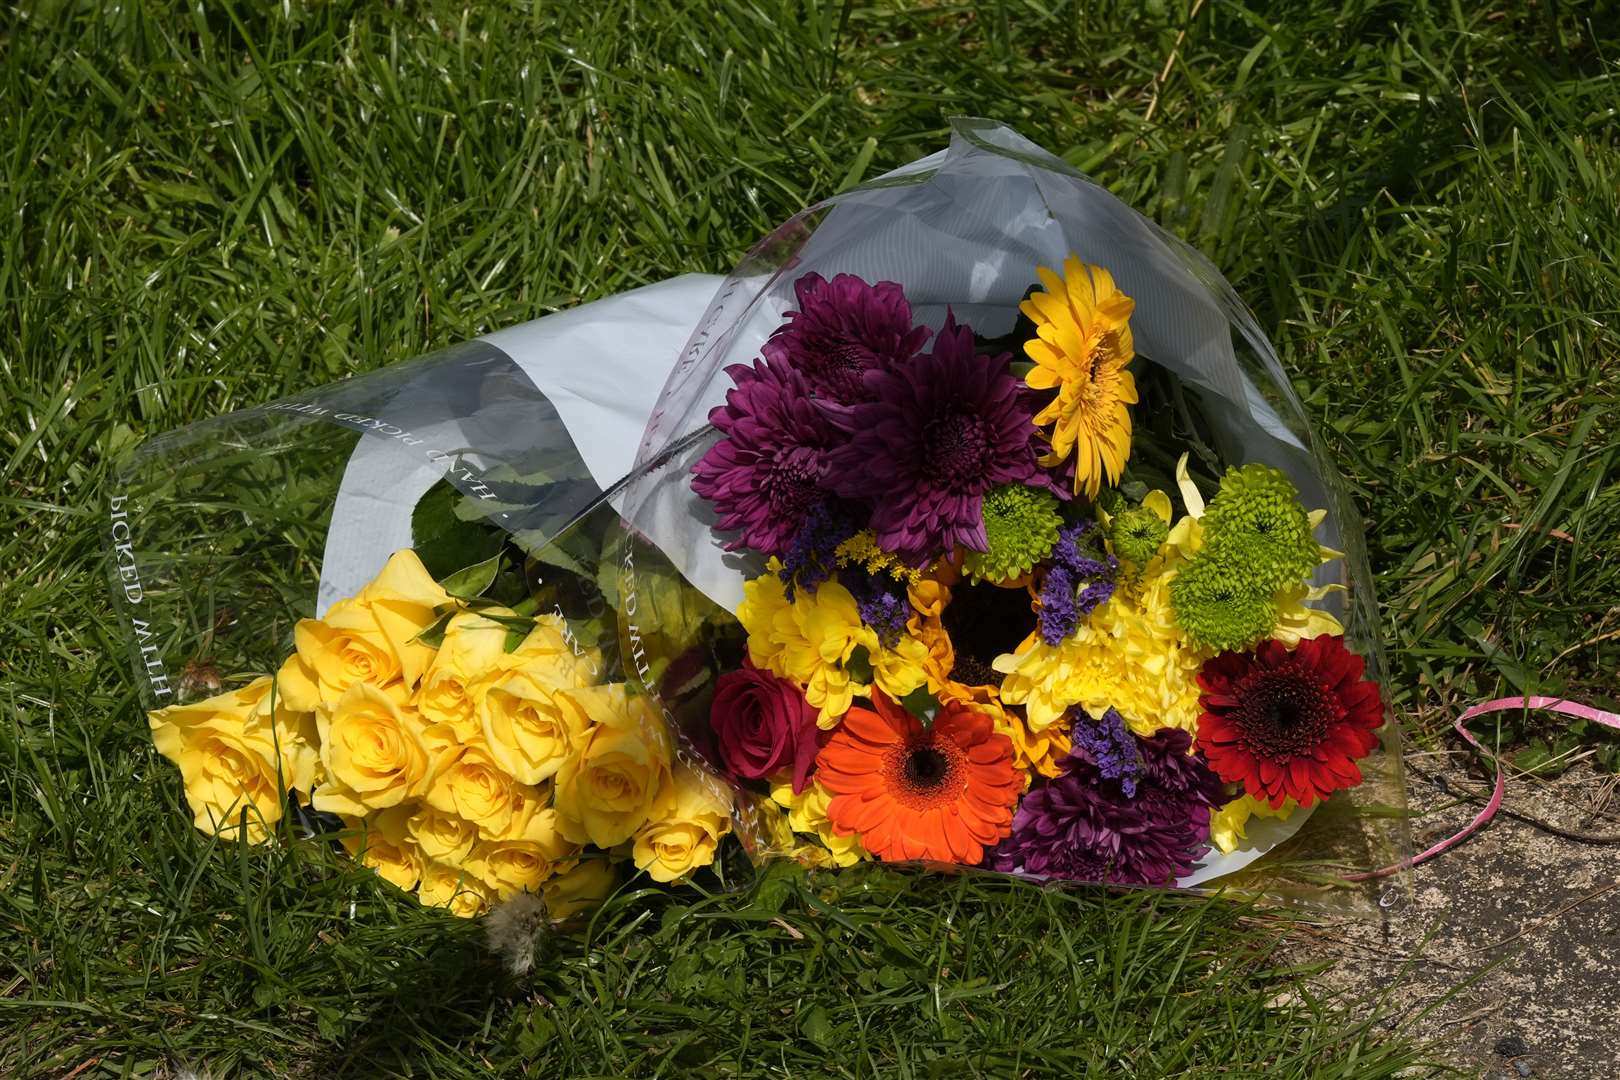 A floral tribute at the scene of the house fire in Bradford (Danny Lawson/PA)